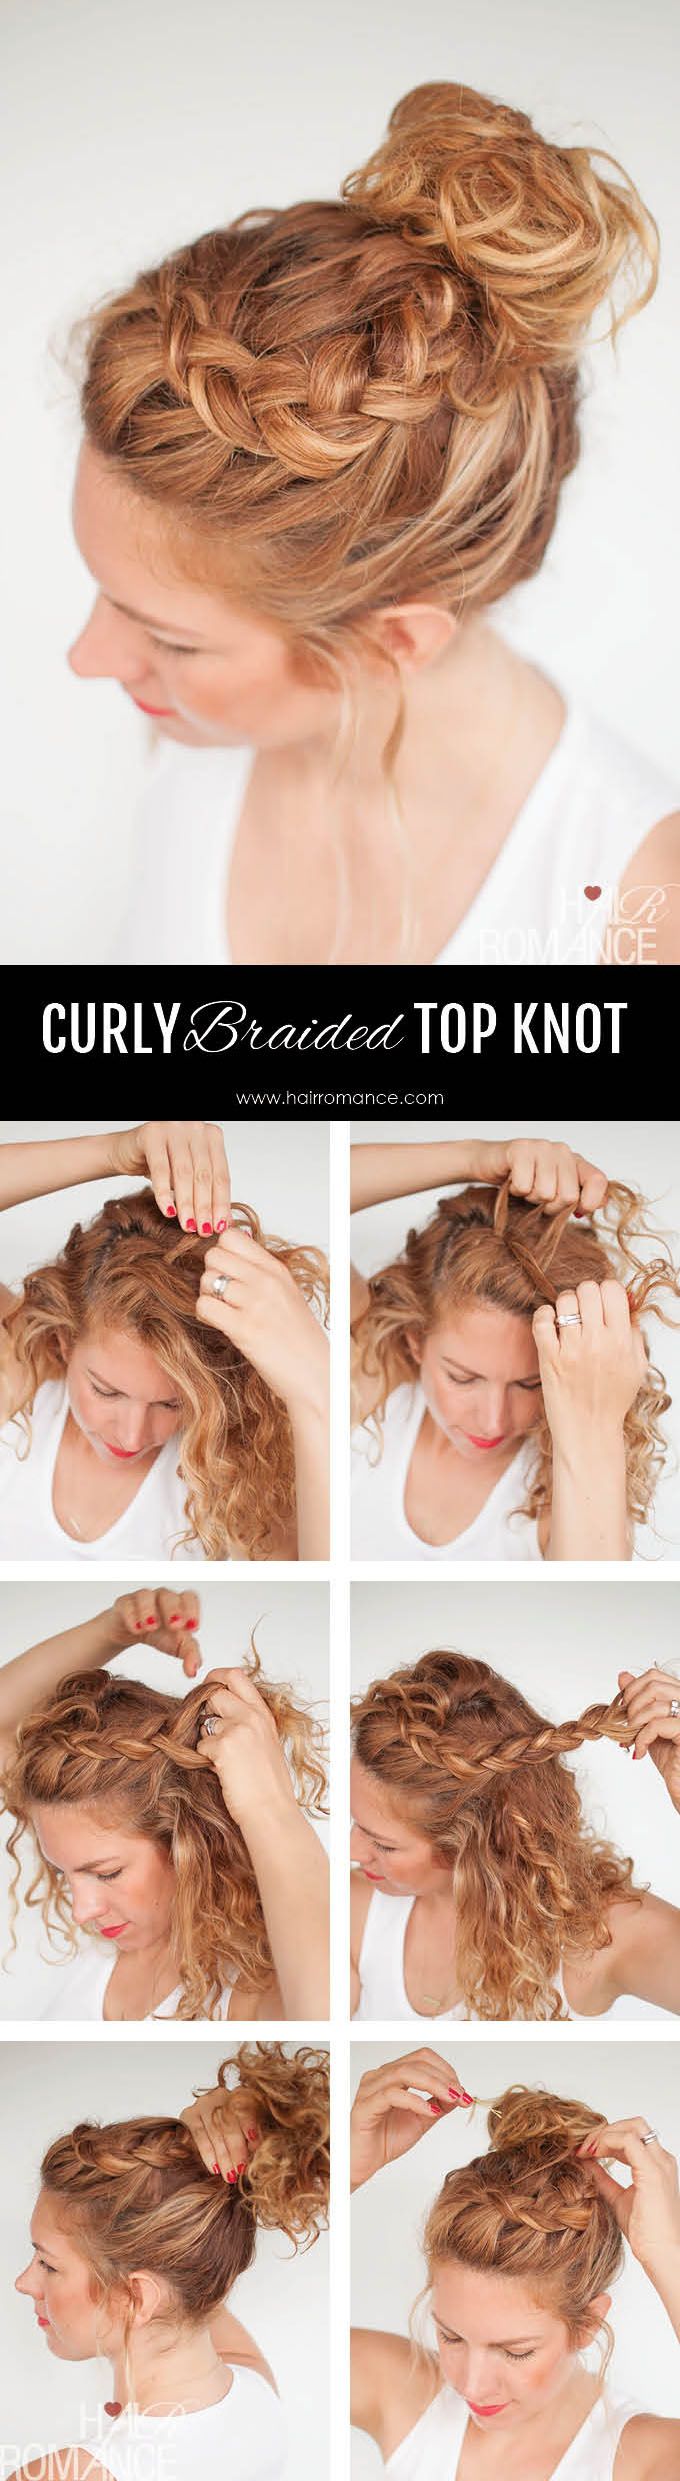 Everyday curly hairstyles – Curly Braided Top Knot Hairstyle Tutorial...